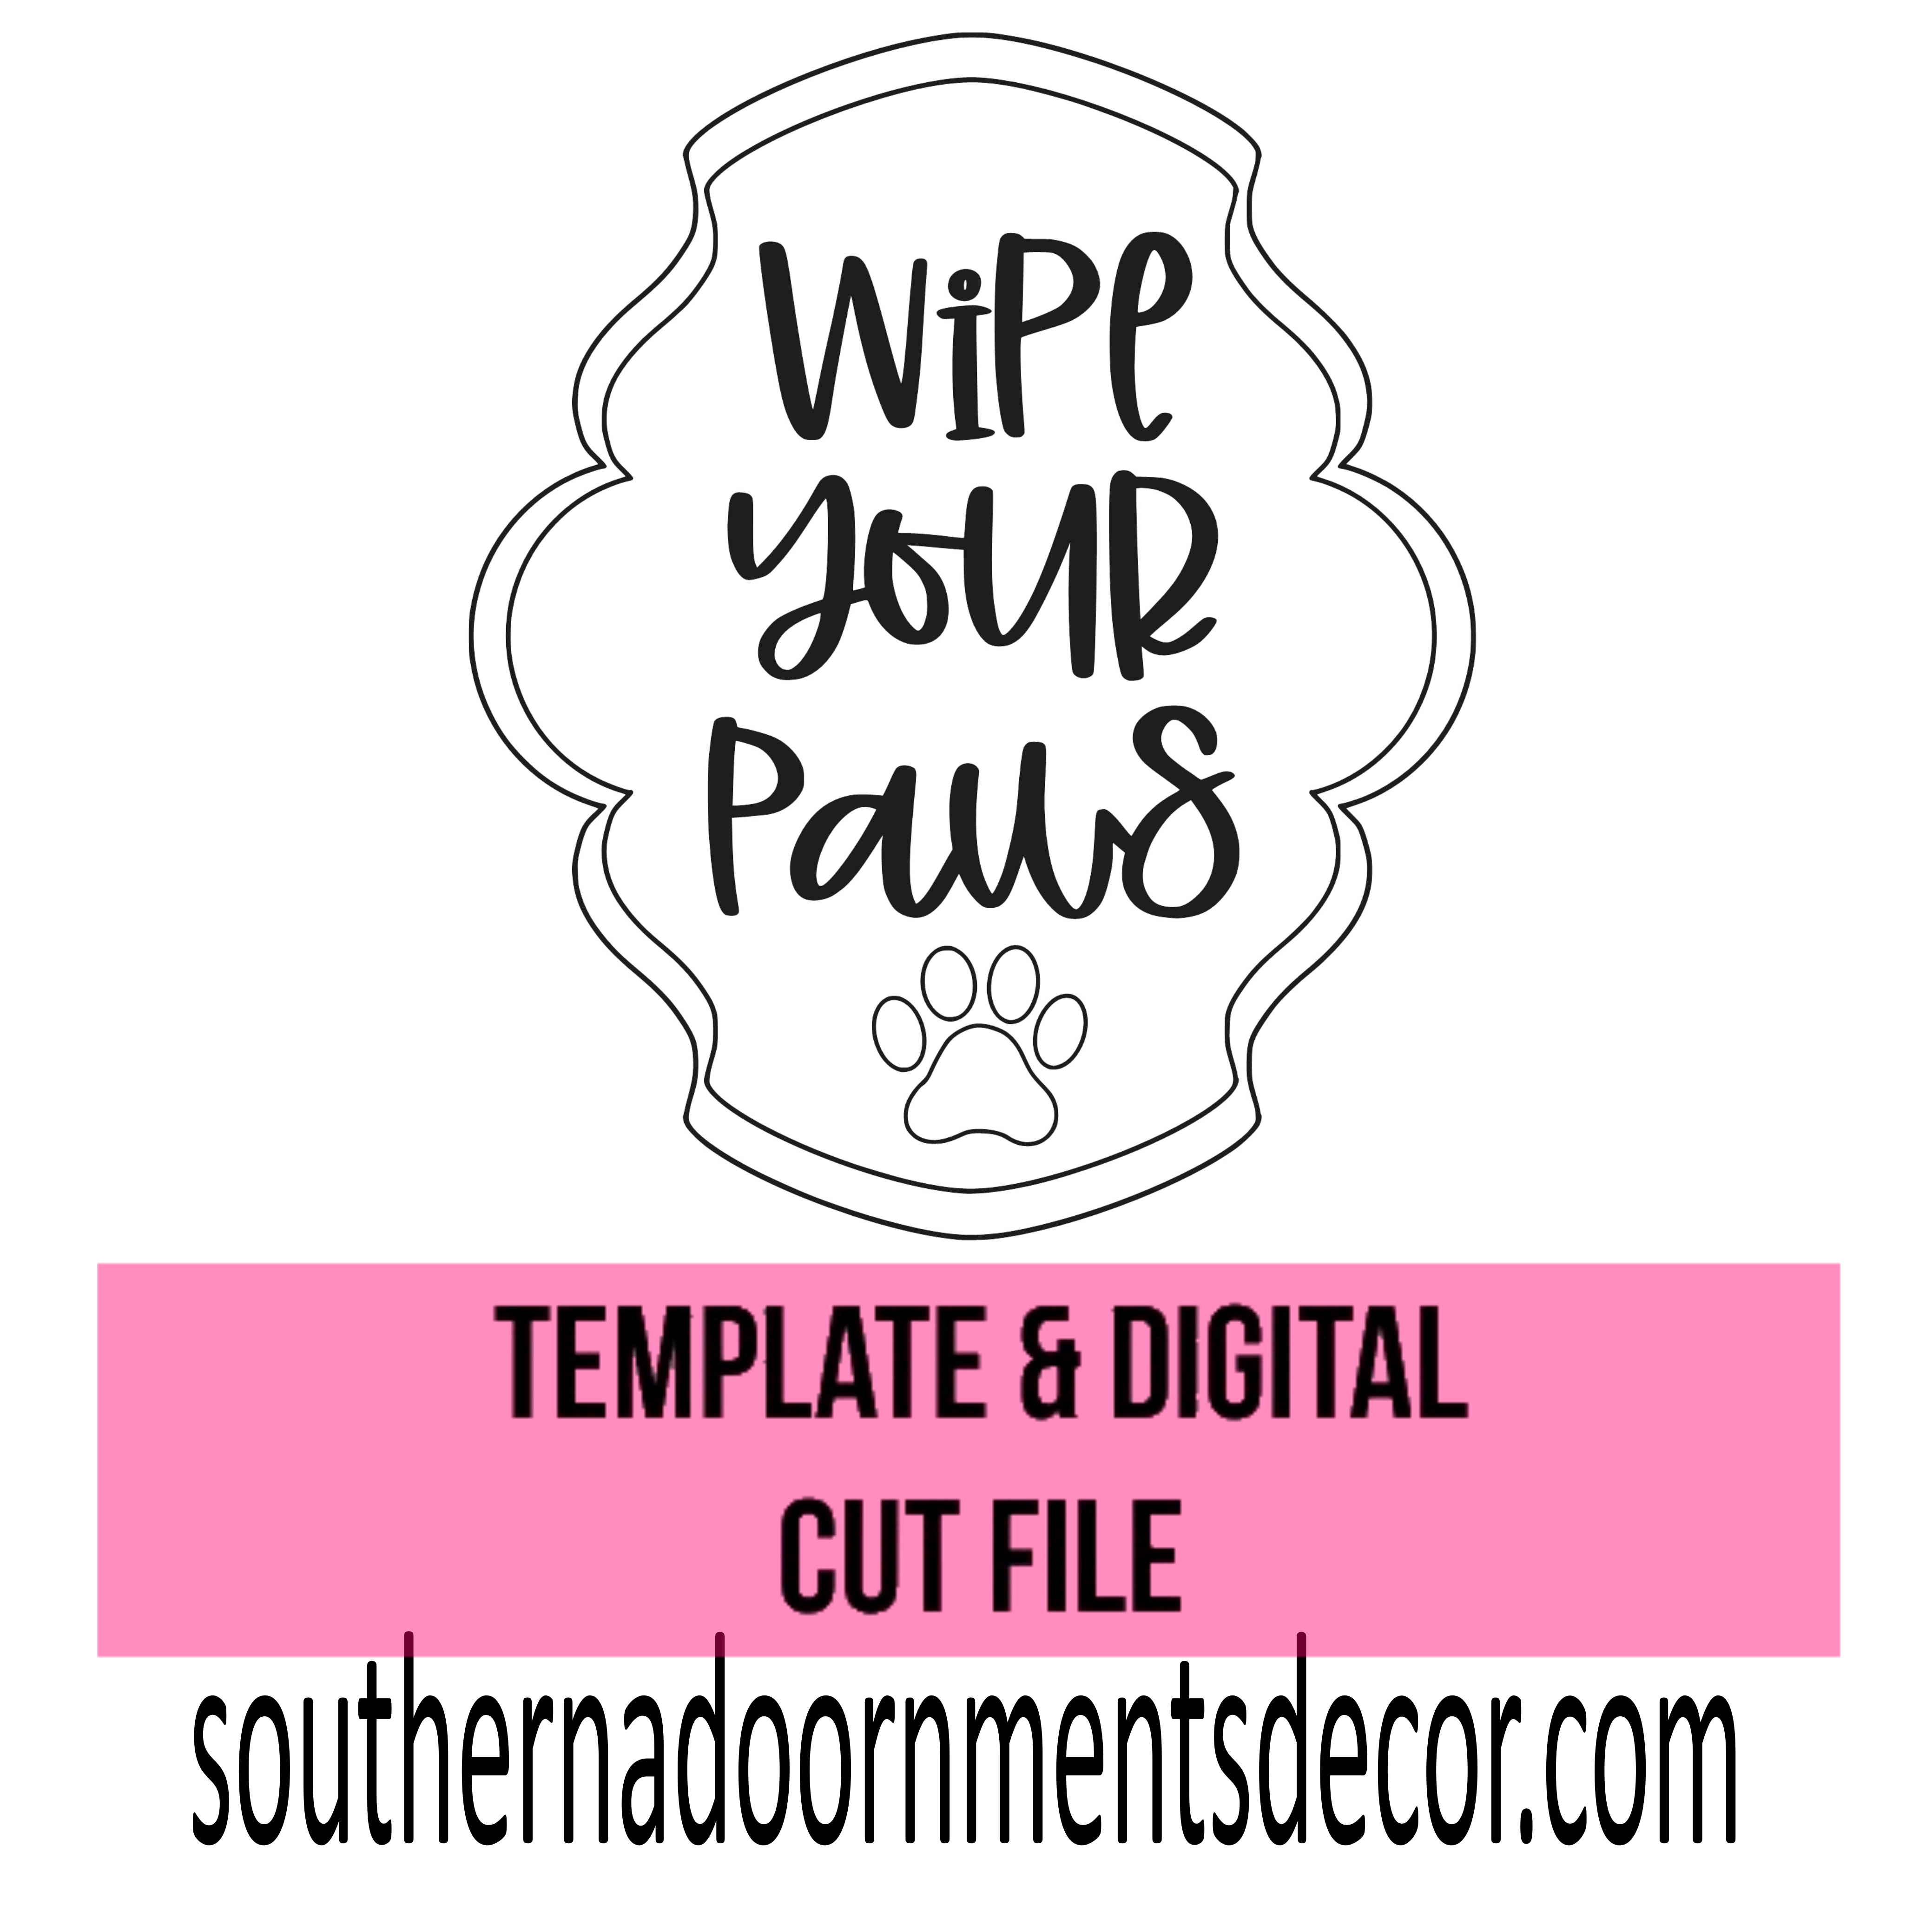 Wipe Your Paws Template & Digital Cut File